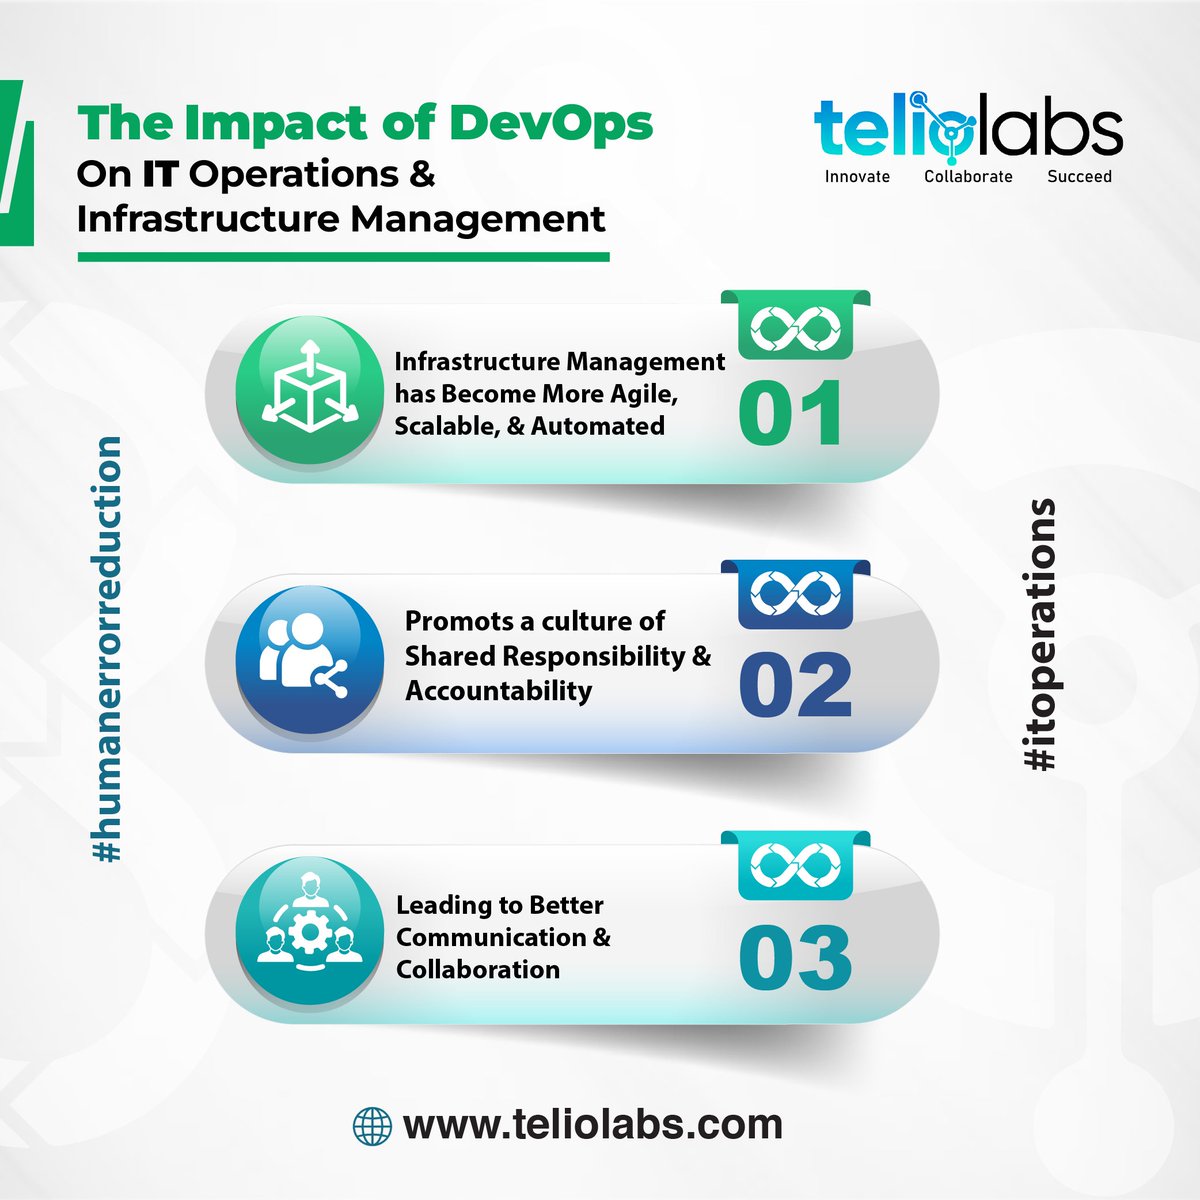 The adoption of DevOps has transformed the traditional approach to IT operations and infrastructure management. .
#DevOps #ITOperations #InfrastructureManagement  #Scalable #Automated #Consistency #InfrastructureAsCode #IaC #Collaboration #SharedResponsibility #teliolabs #5g